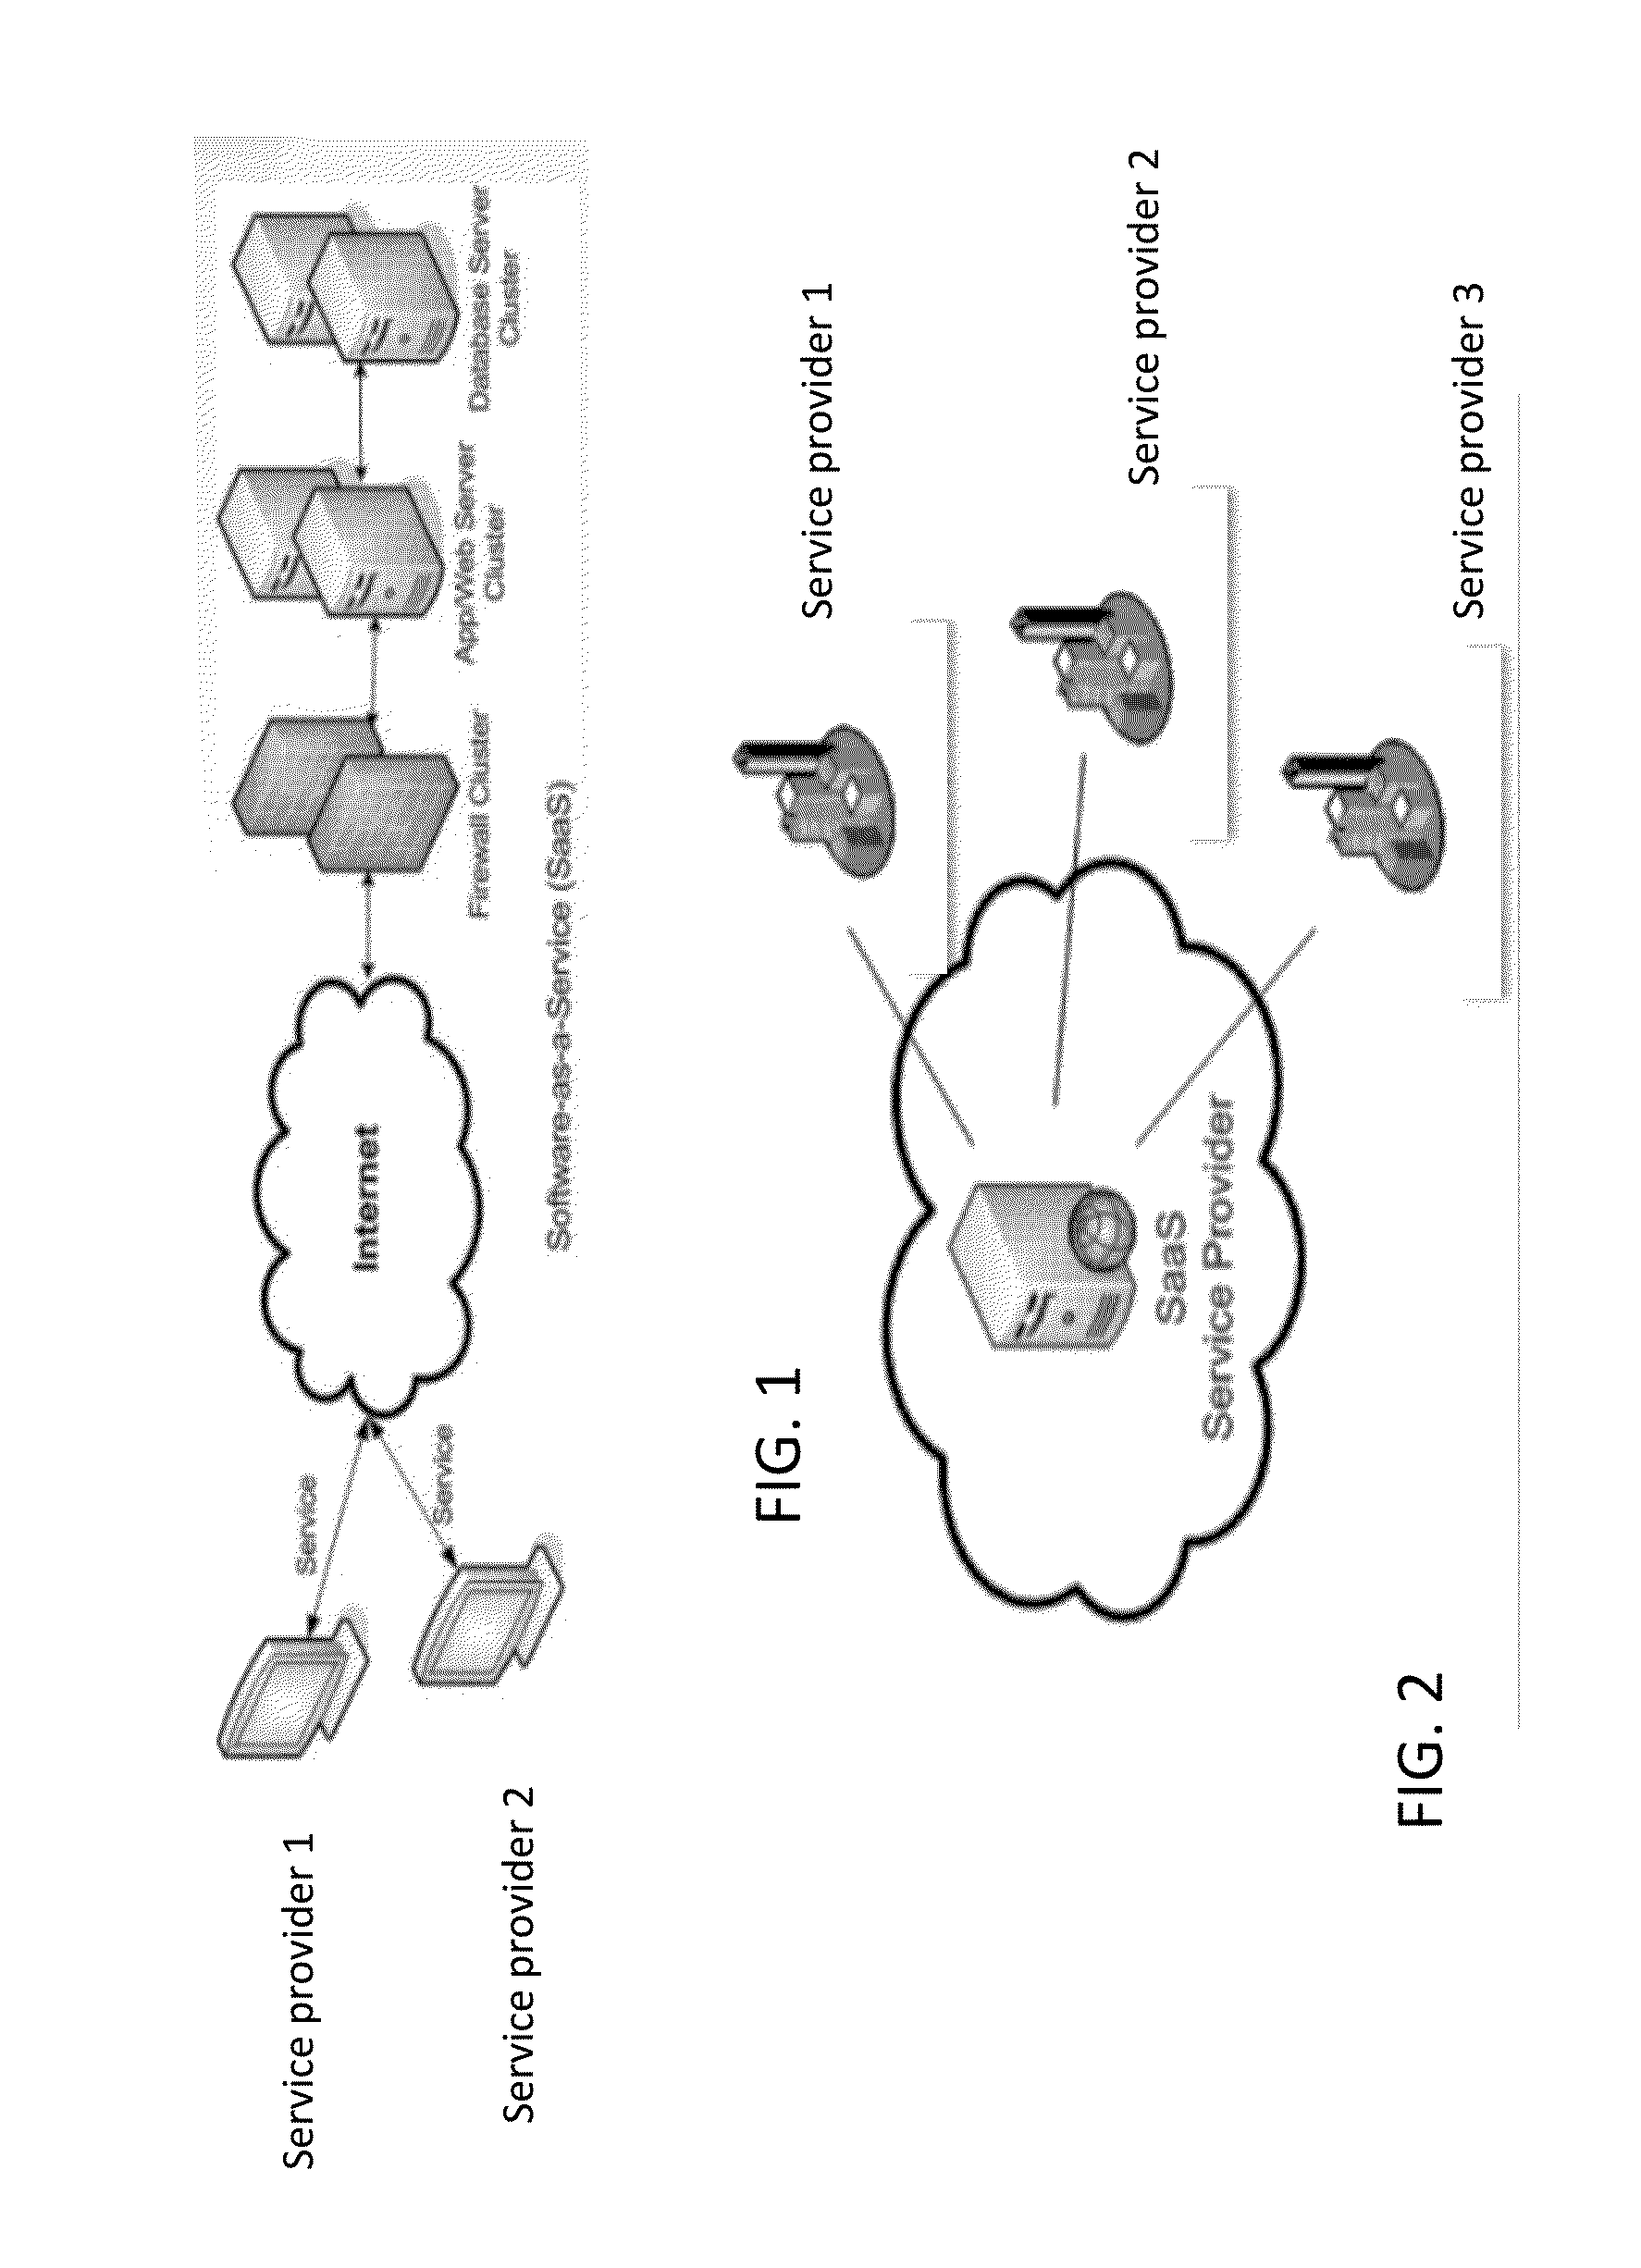 System and method for managing workflows associated with a document exchanged between a first service provider and a second service provider